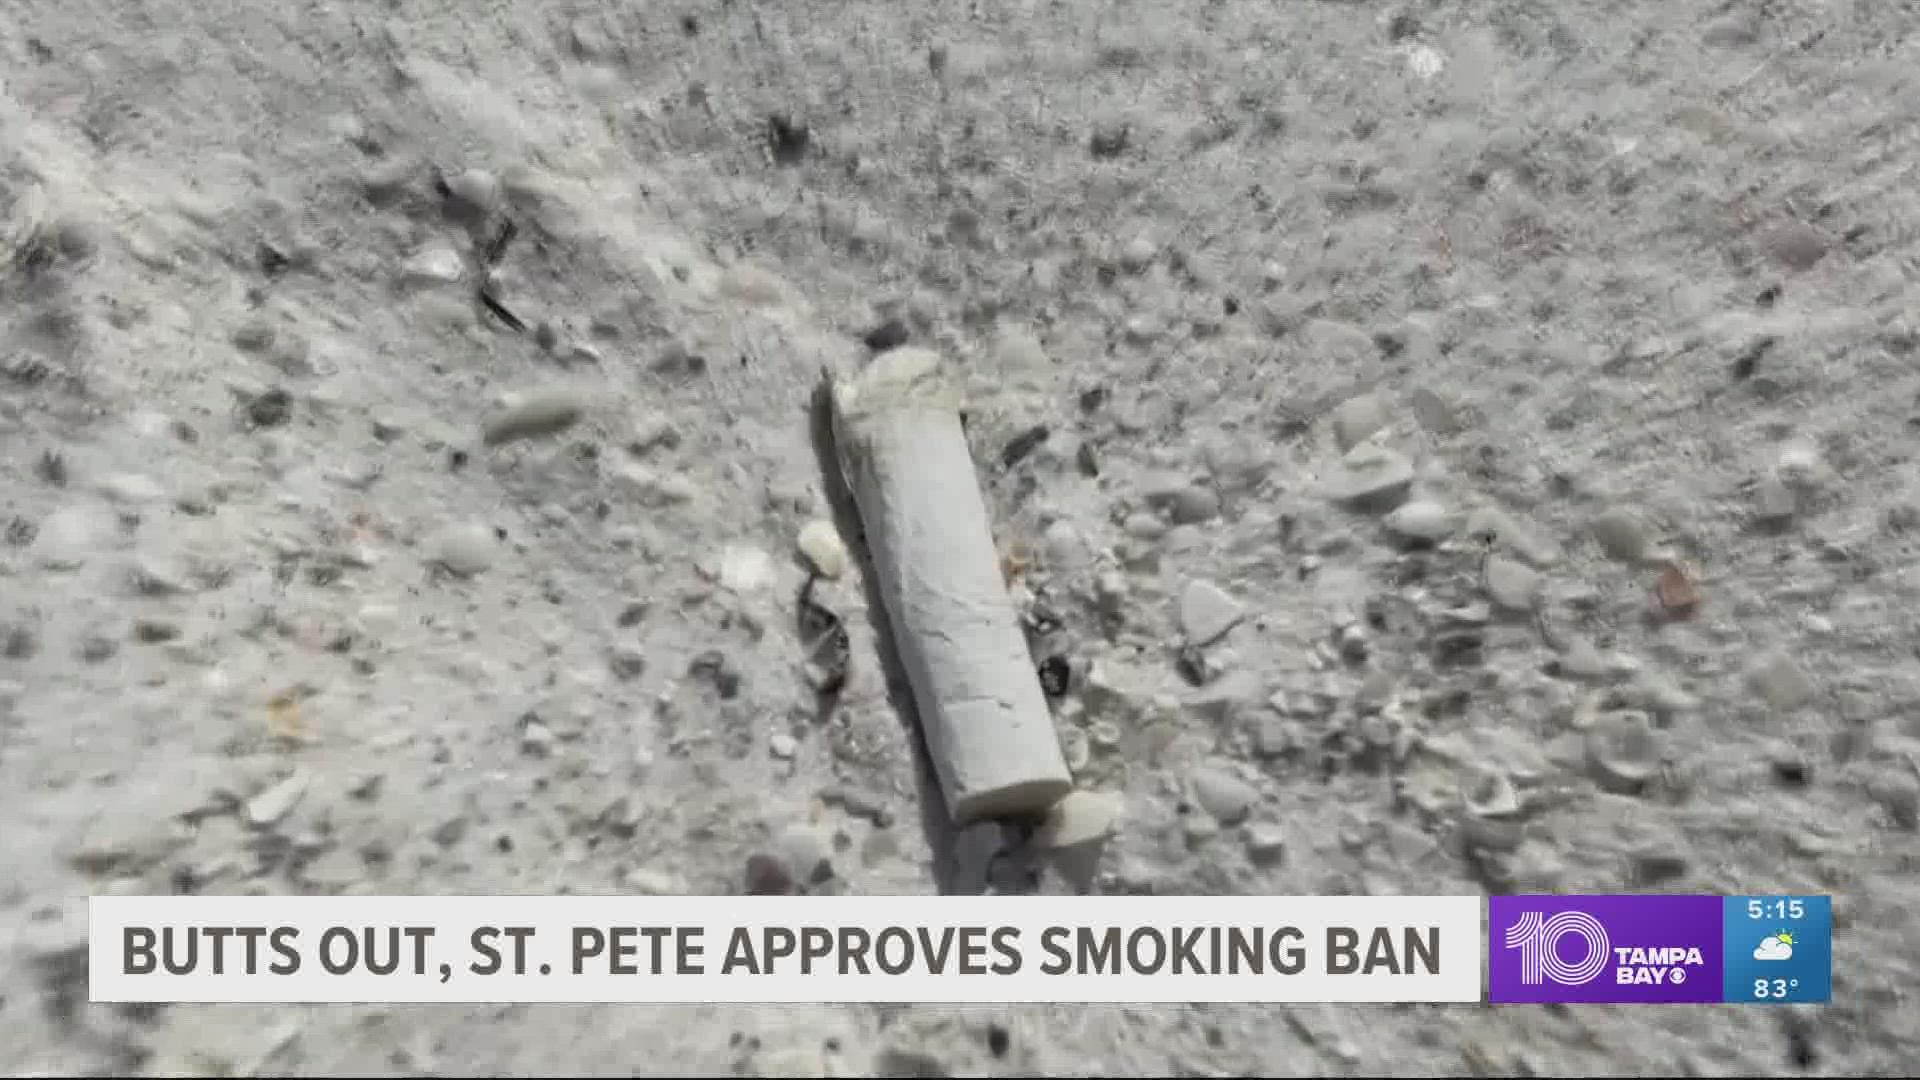 Smokers who violate the restrictions could be hit with fines up to $93 starting next year.